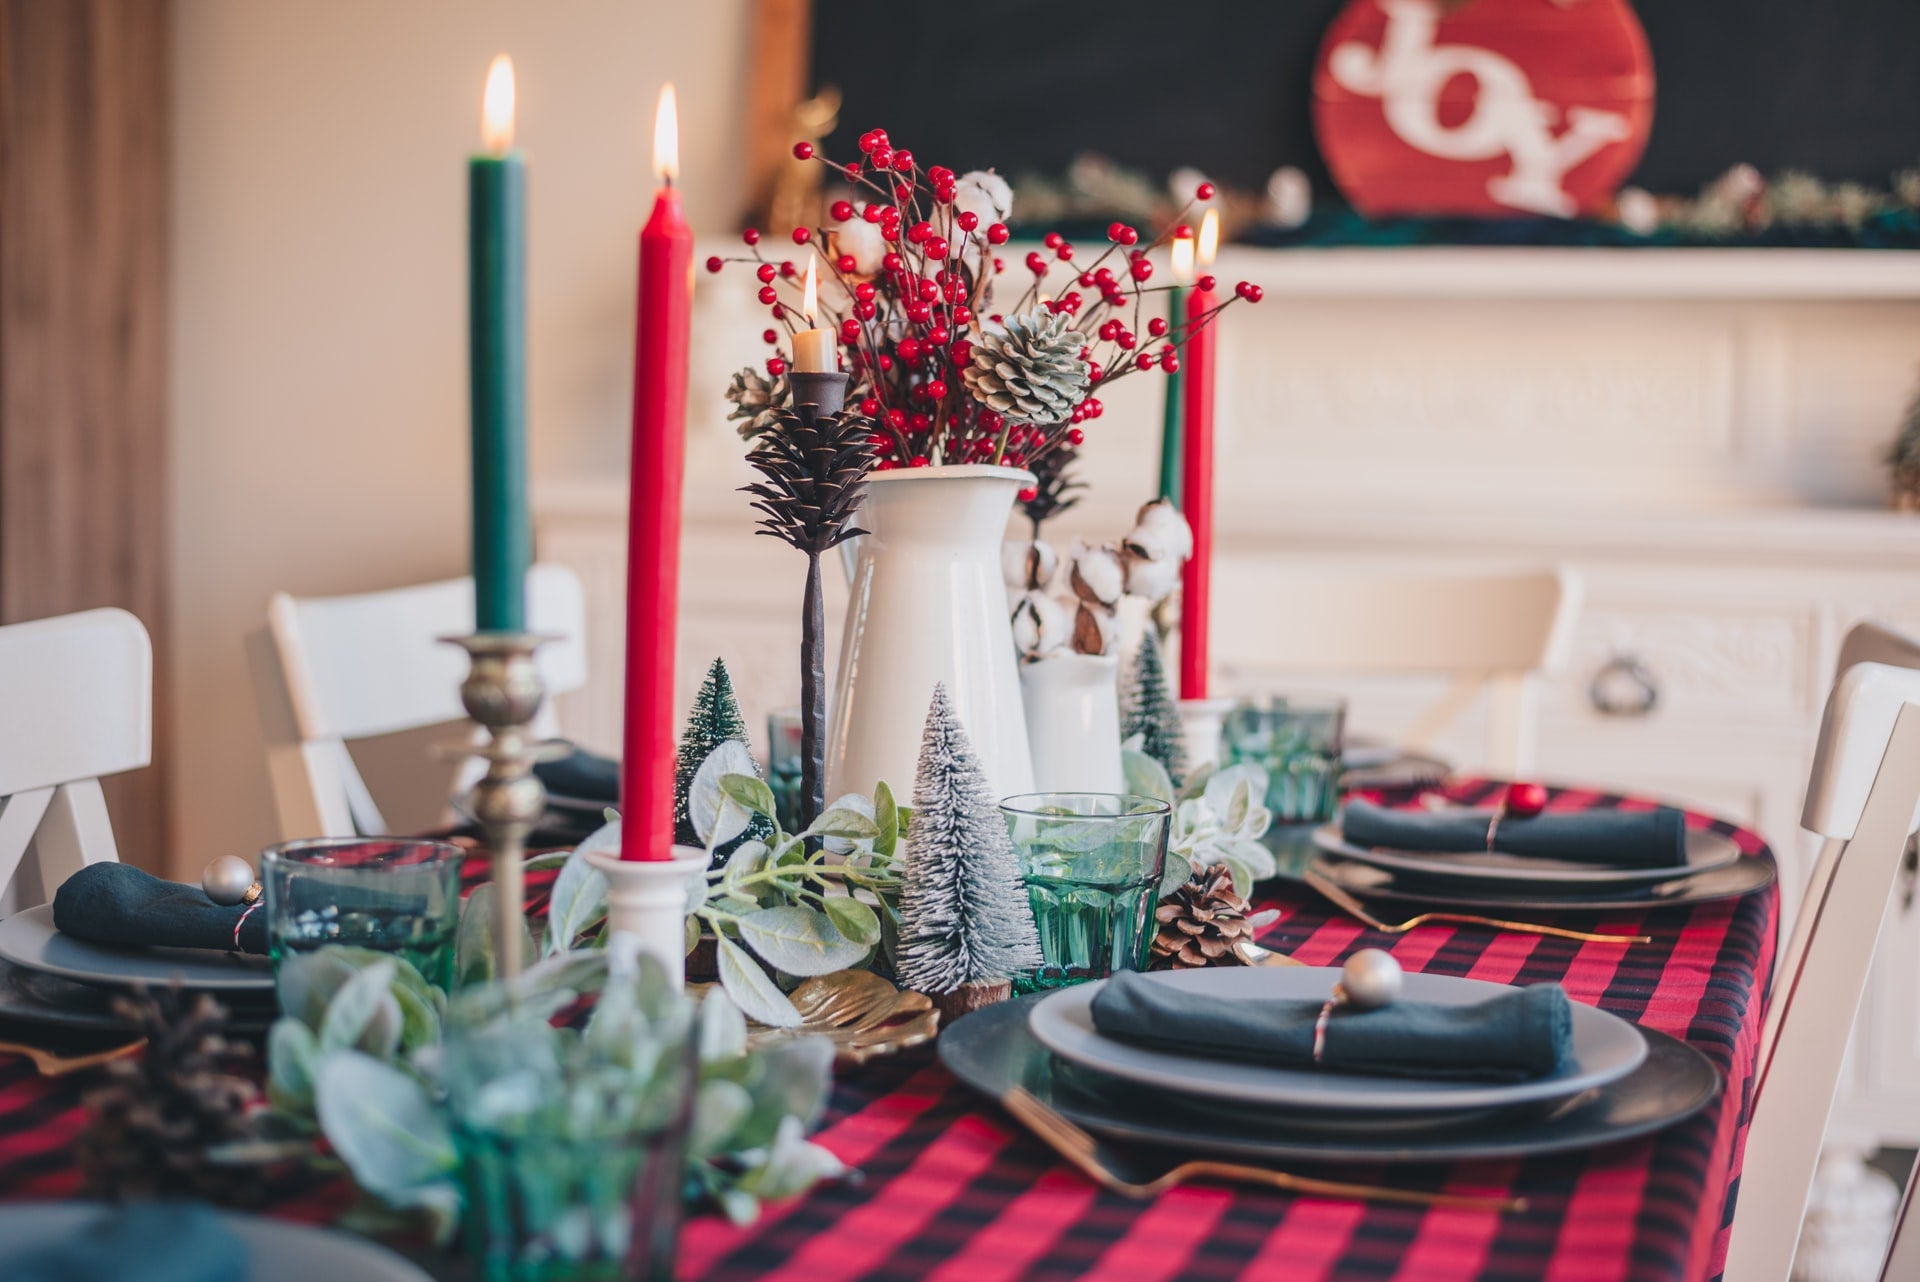 5 steps to prep your house for Christmas guests